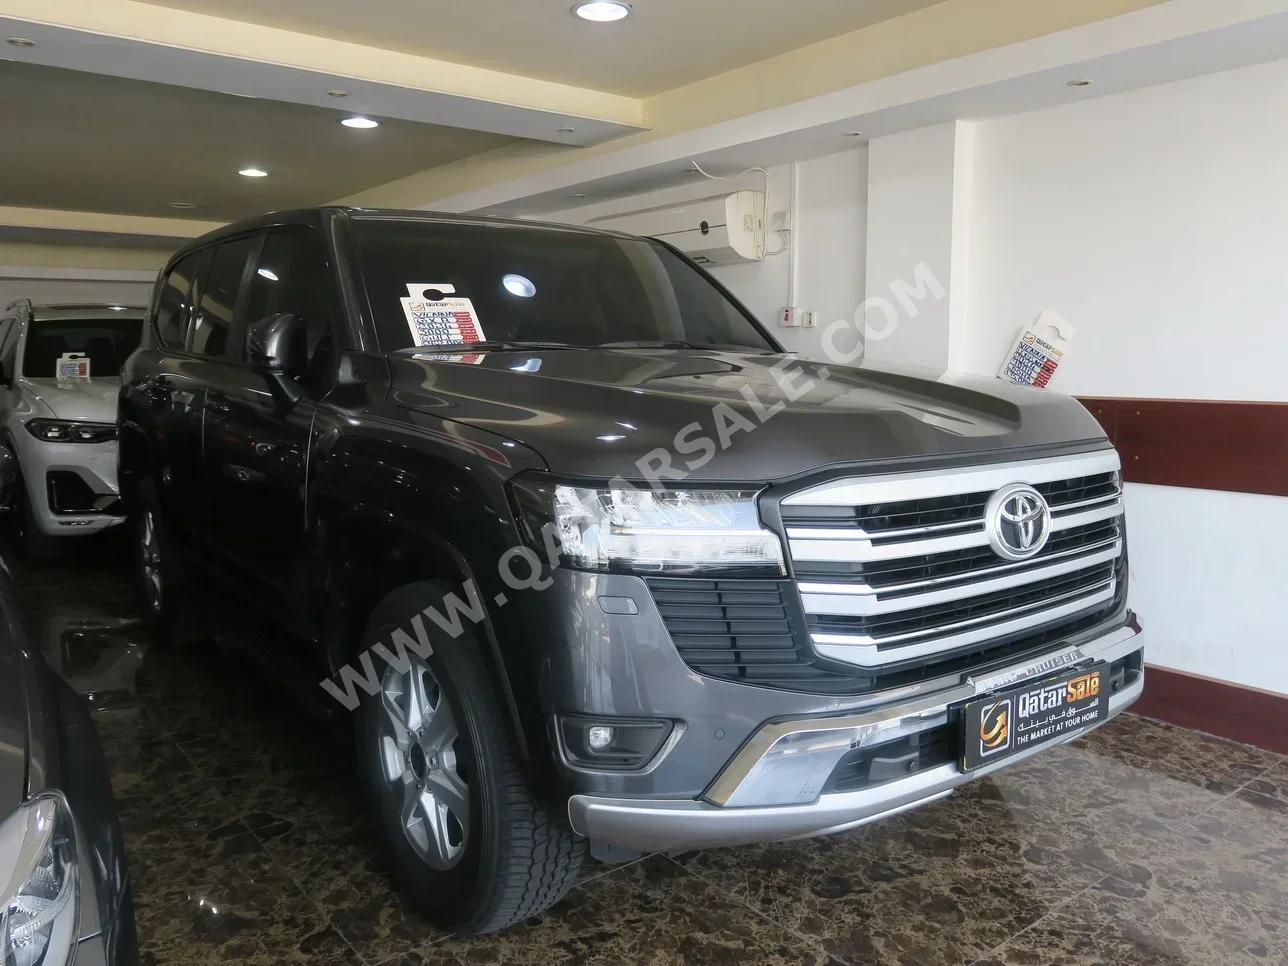 Toyota  Land Cruiser  GXR  2024  Automatic  3,000 Km  6 Cylinder  Four Wheel Drive (4WD)  SUV  Gray  With Warranty